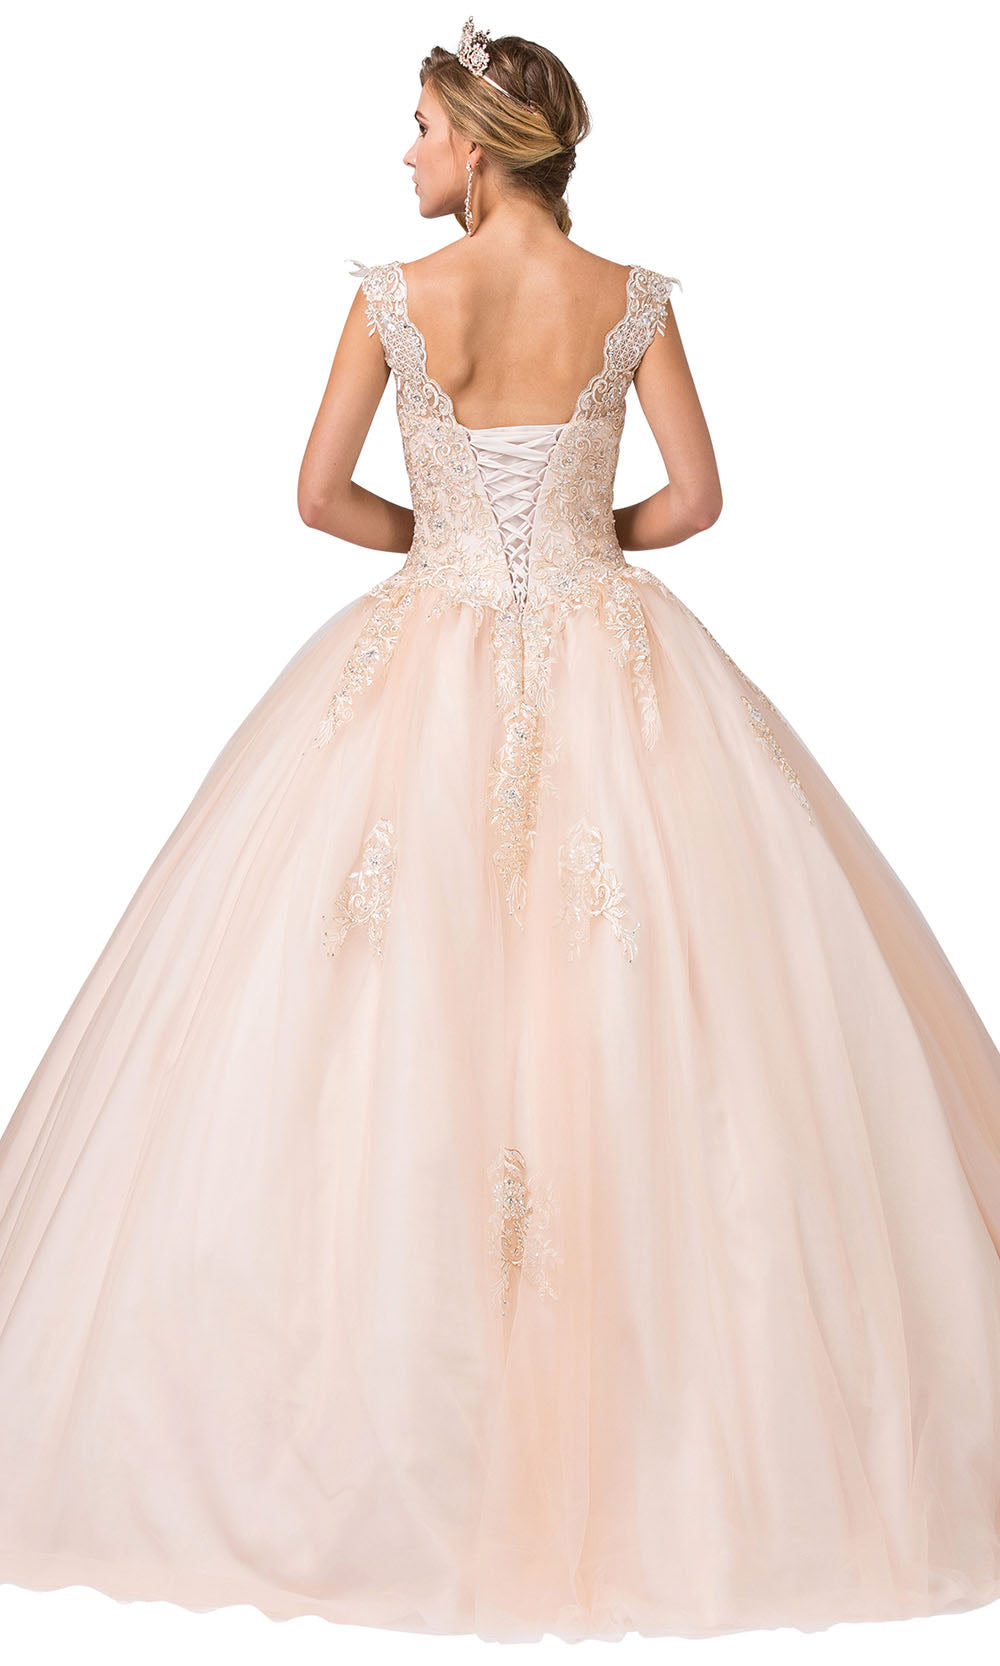 Dancing Queen - 1287 Cap Sleeve Embroidered Ballgown In Champagne & Gold